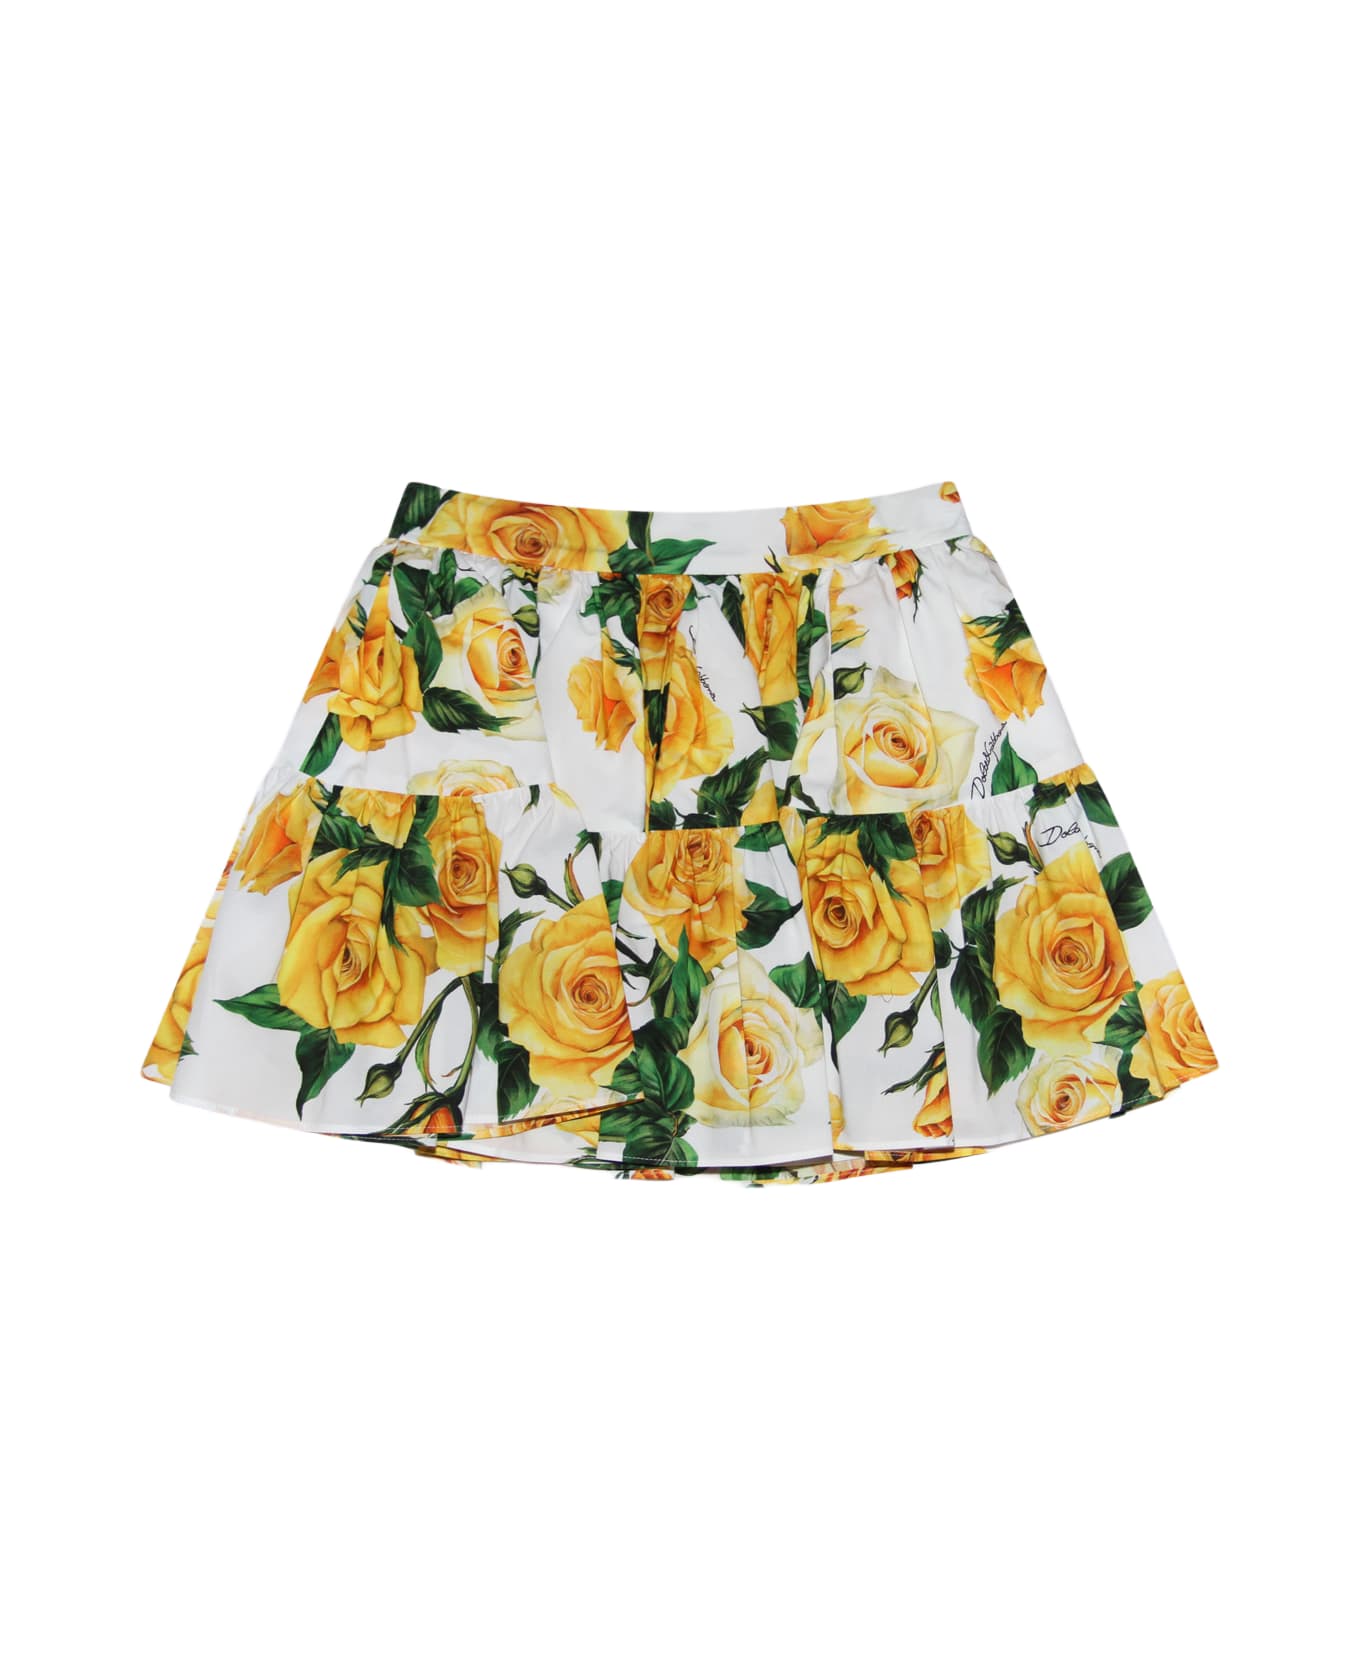 Dolce & Gabbana White, Yellow And Green Cotton Skirt - ROSE GIALLE F.DO BIANCO